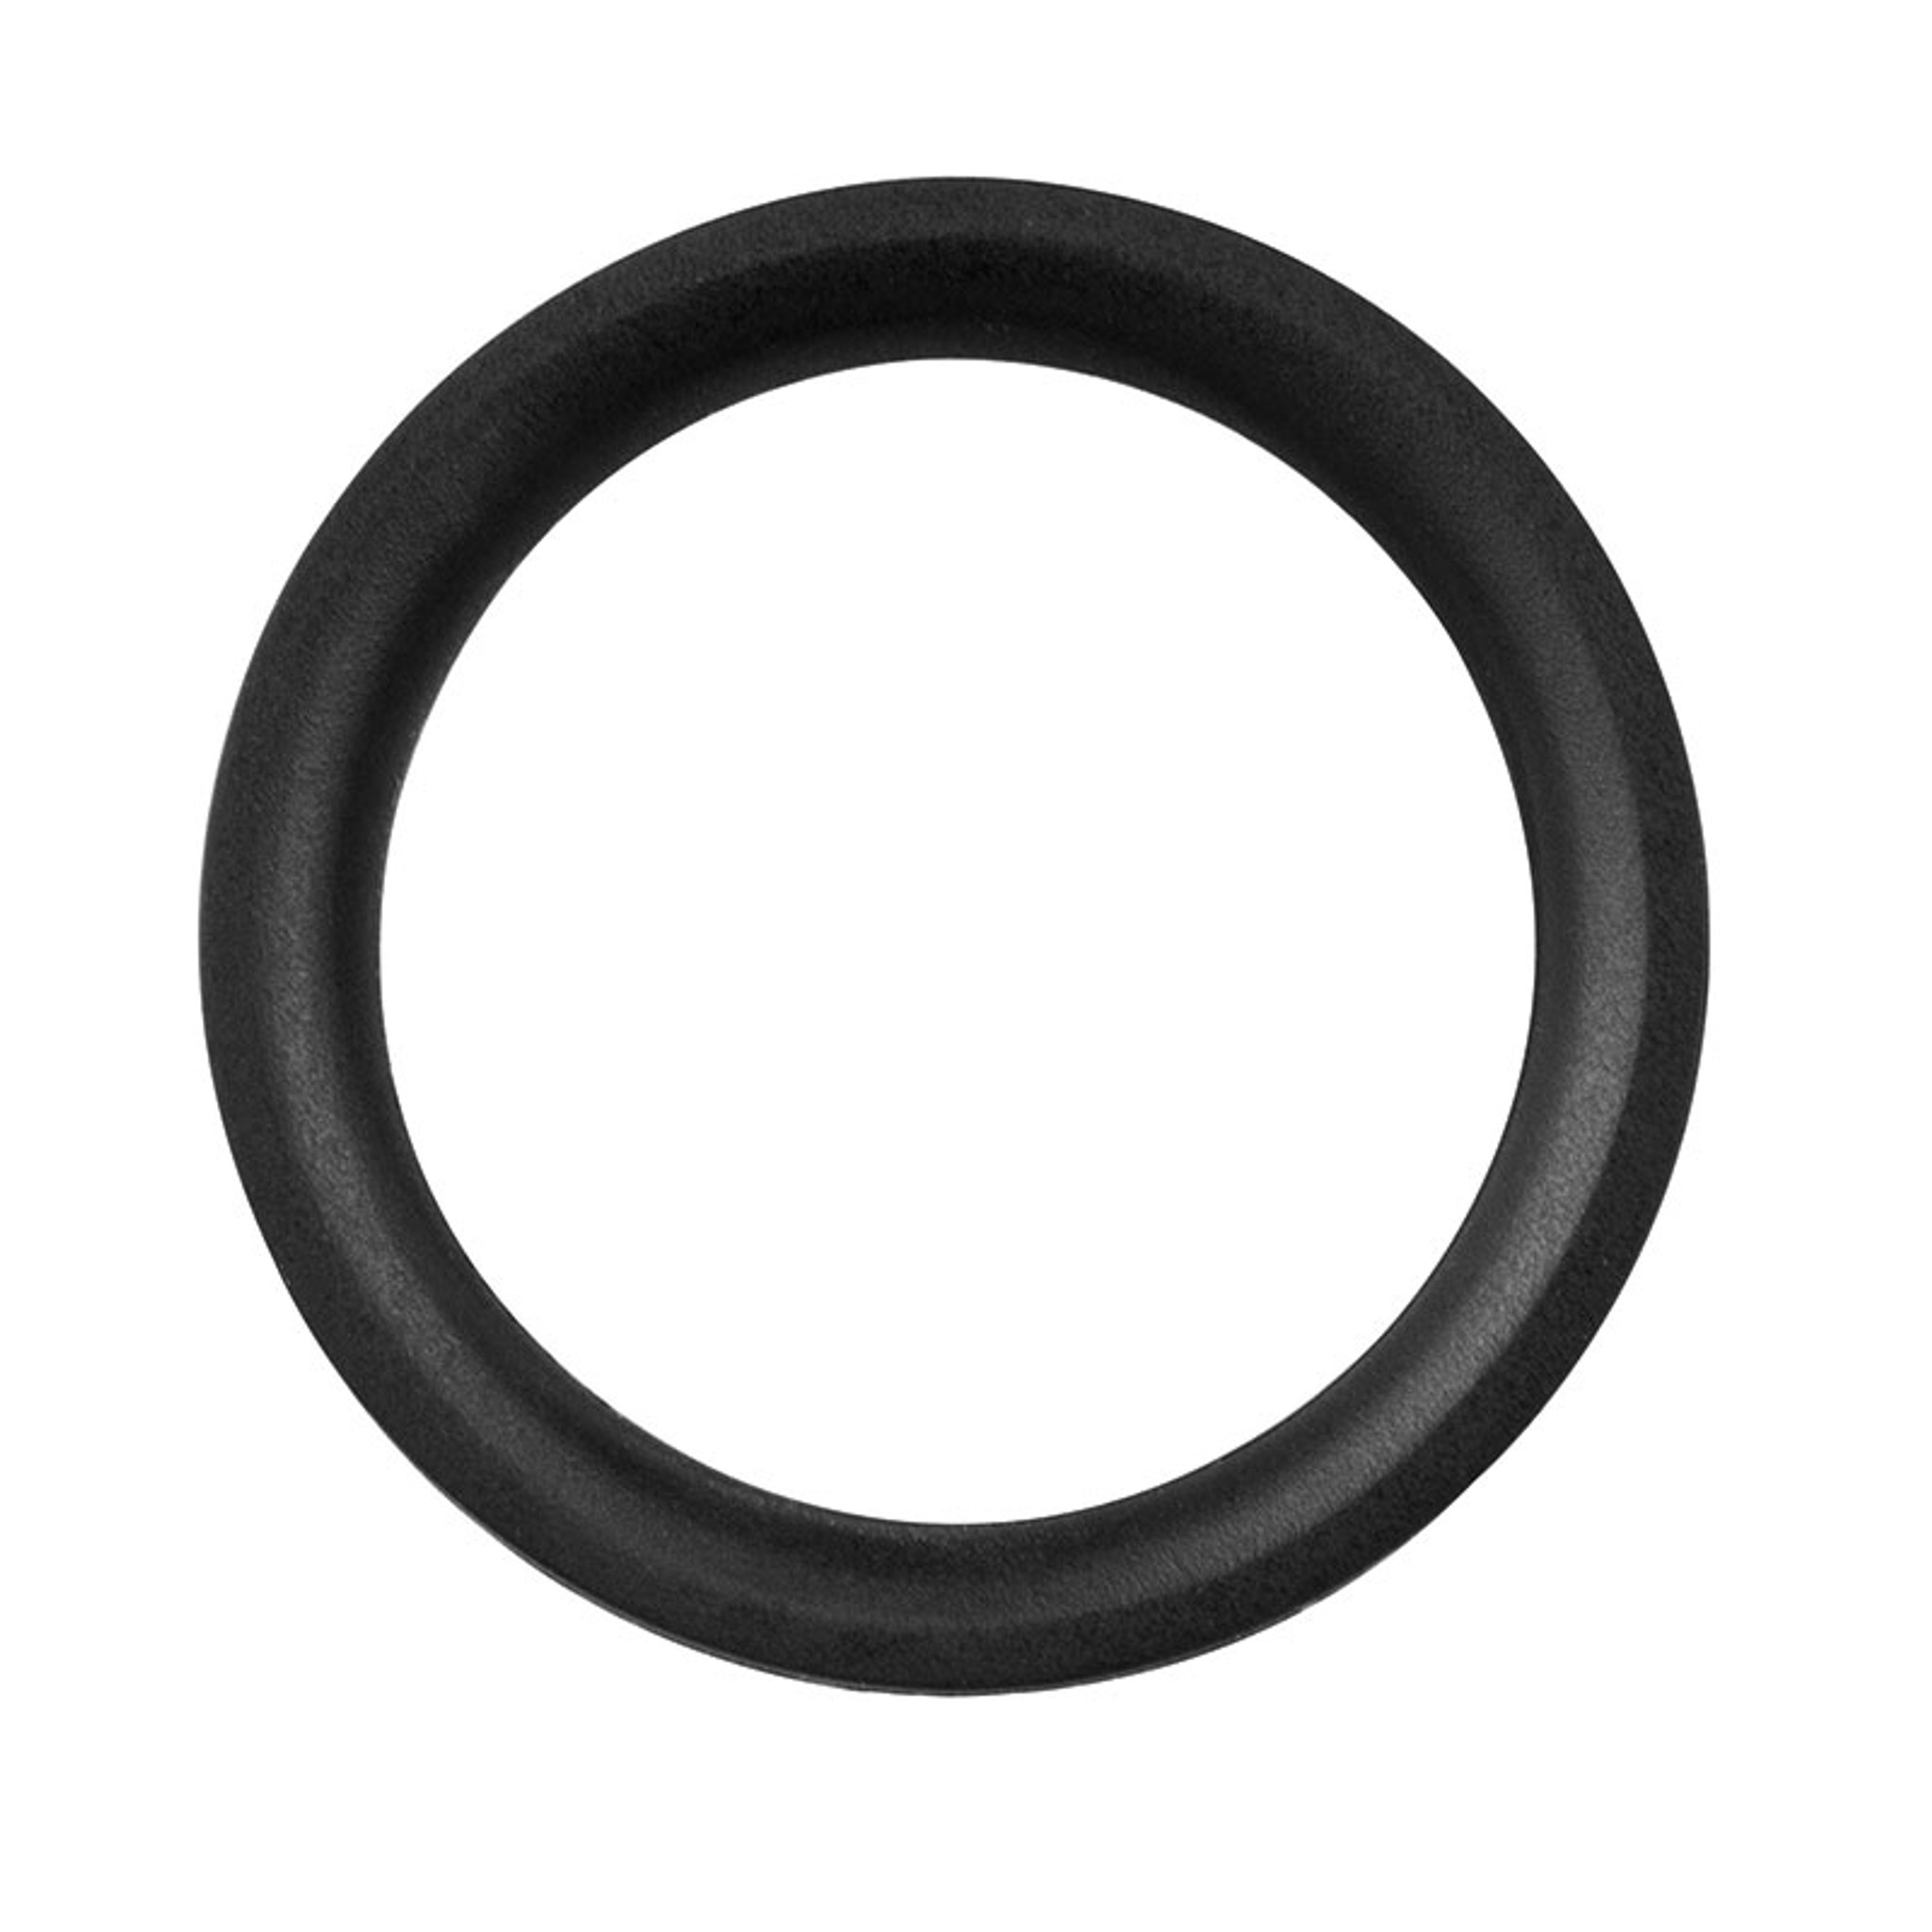 Screaming O RingO Pro Stretchy Silicone Cock Ring